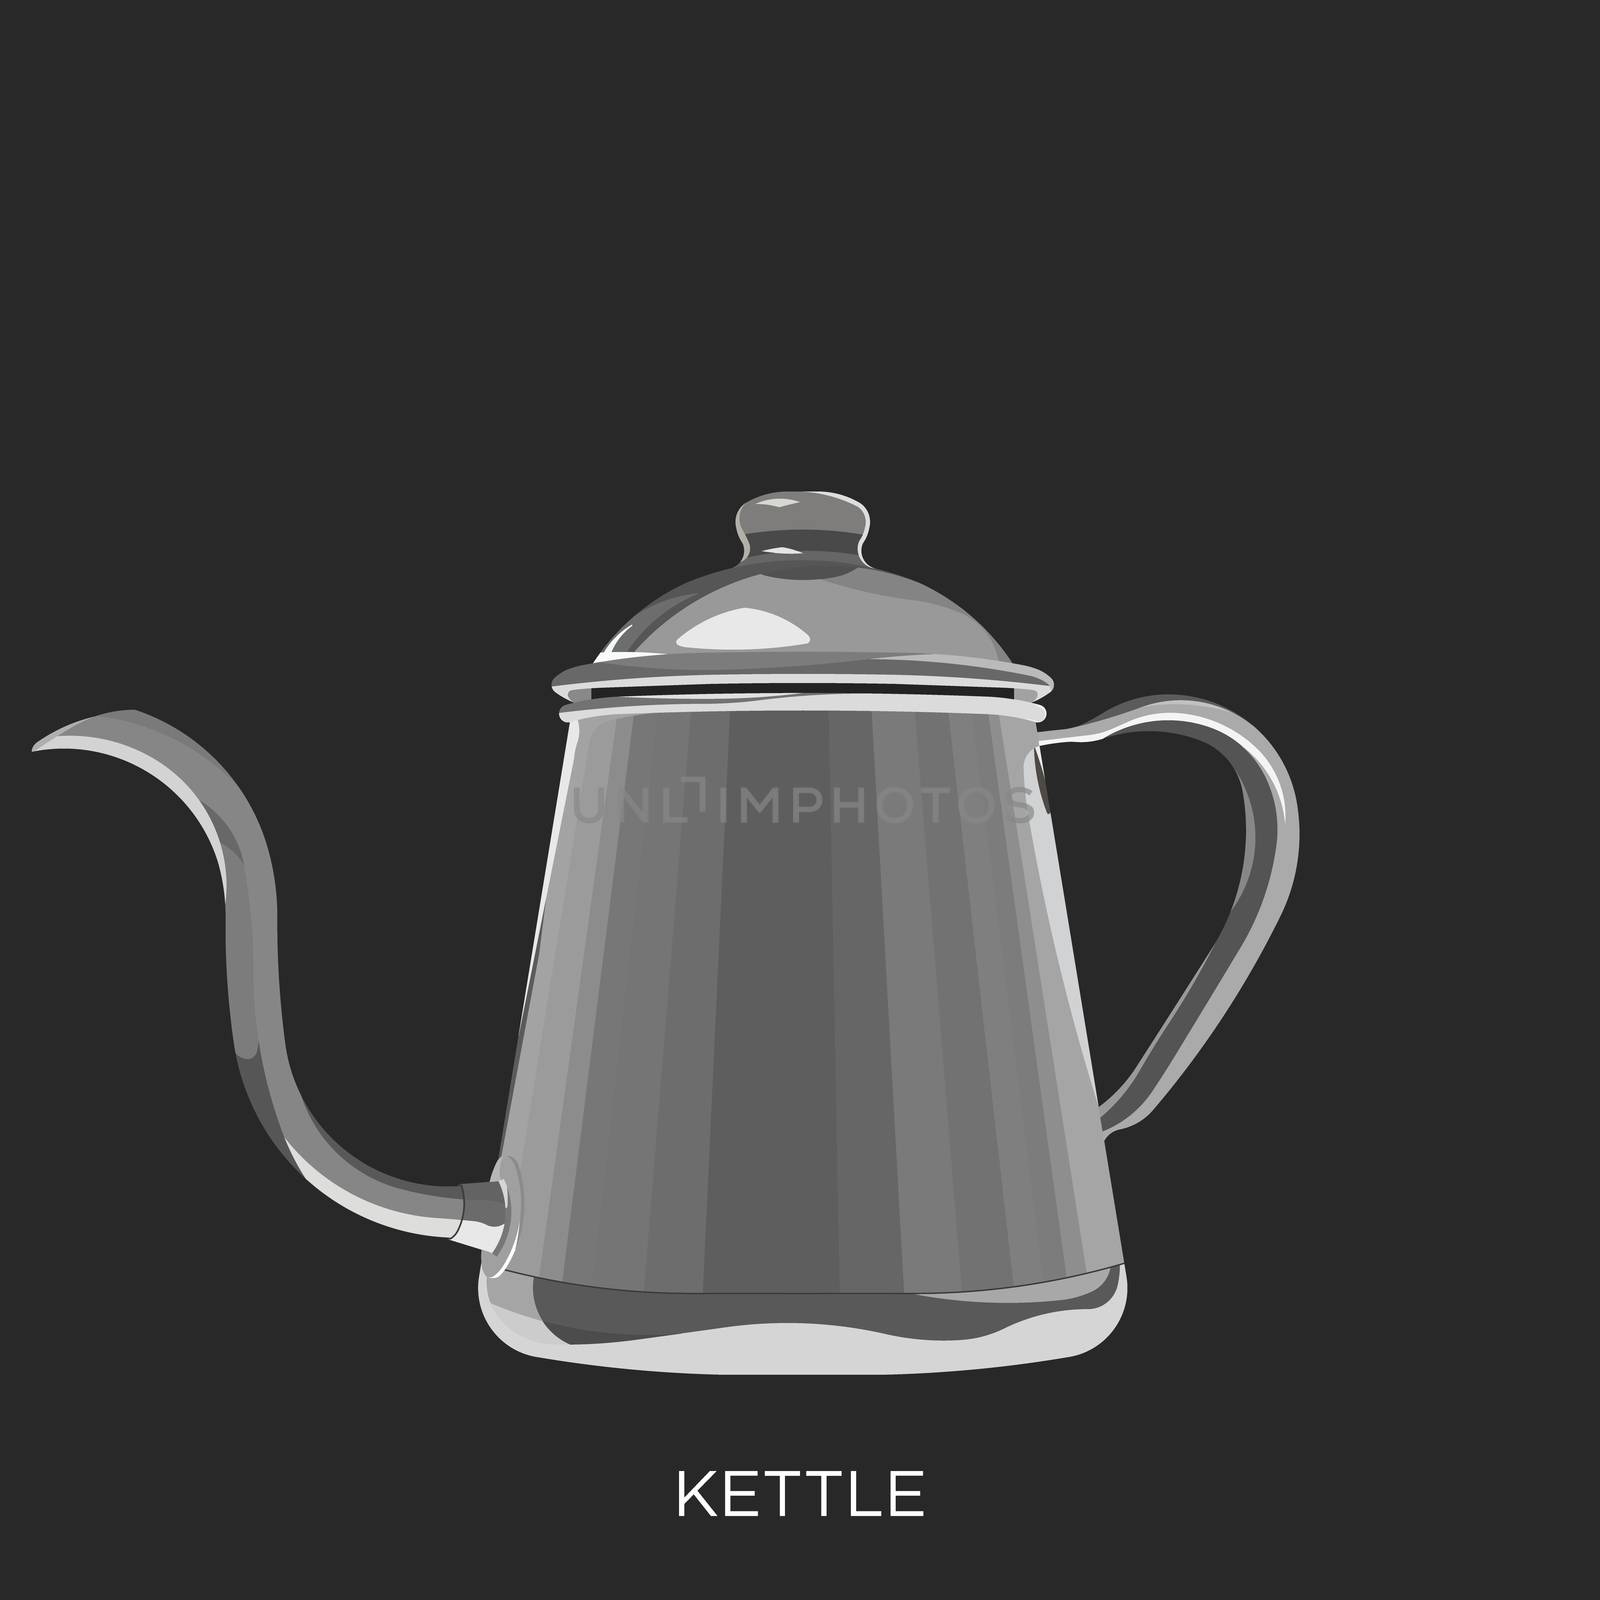 Pour Over Brewing Kettle by landscafe